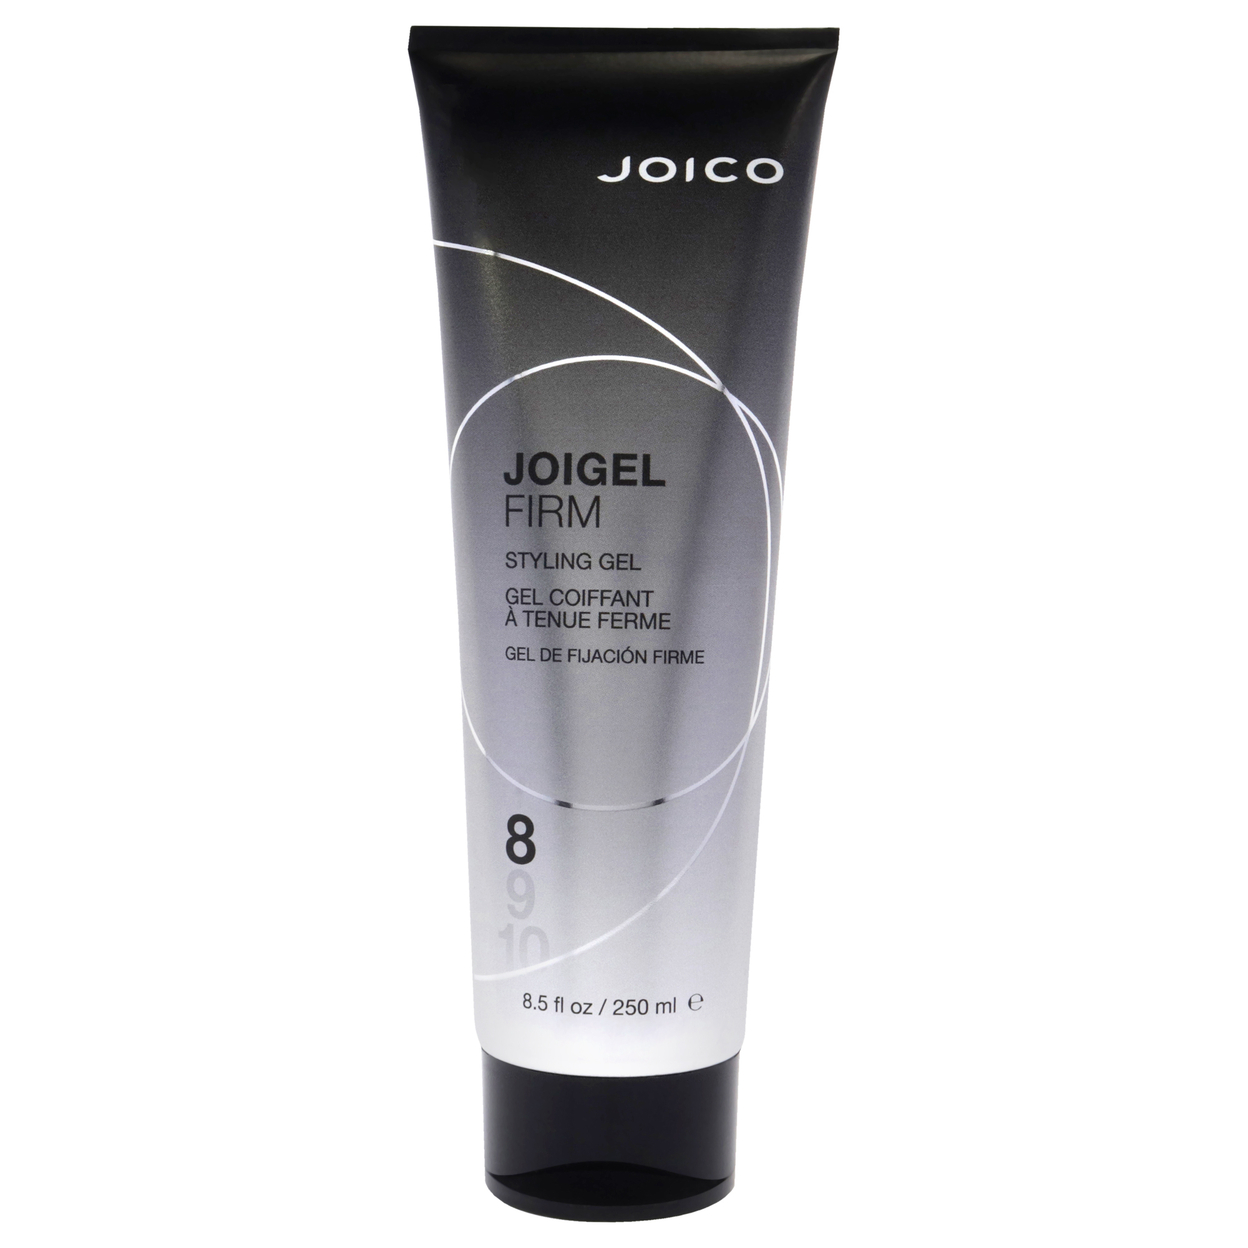 Joico Unisex HAIRCARE Joigel Firm Styling Gel 8.5 Oz